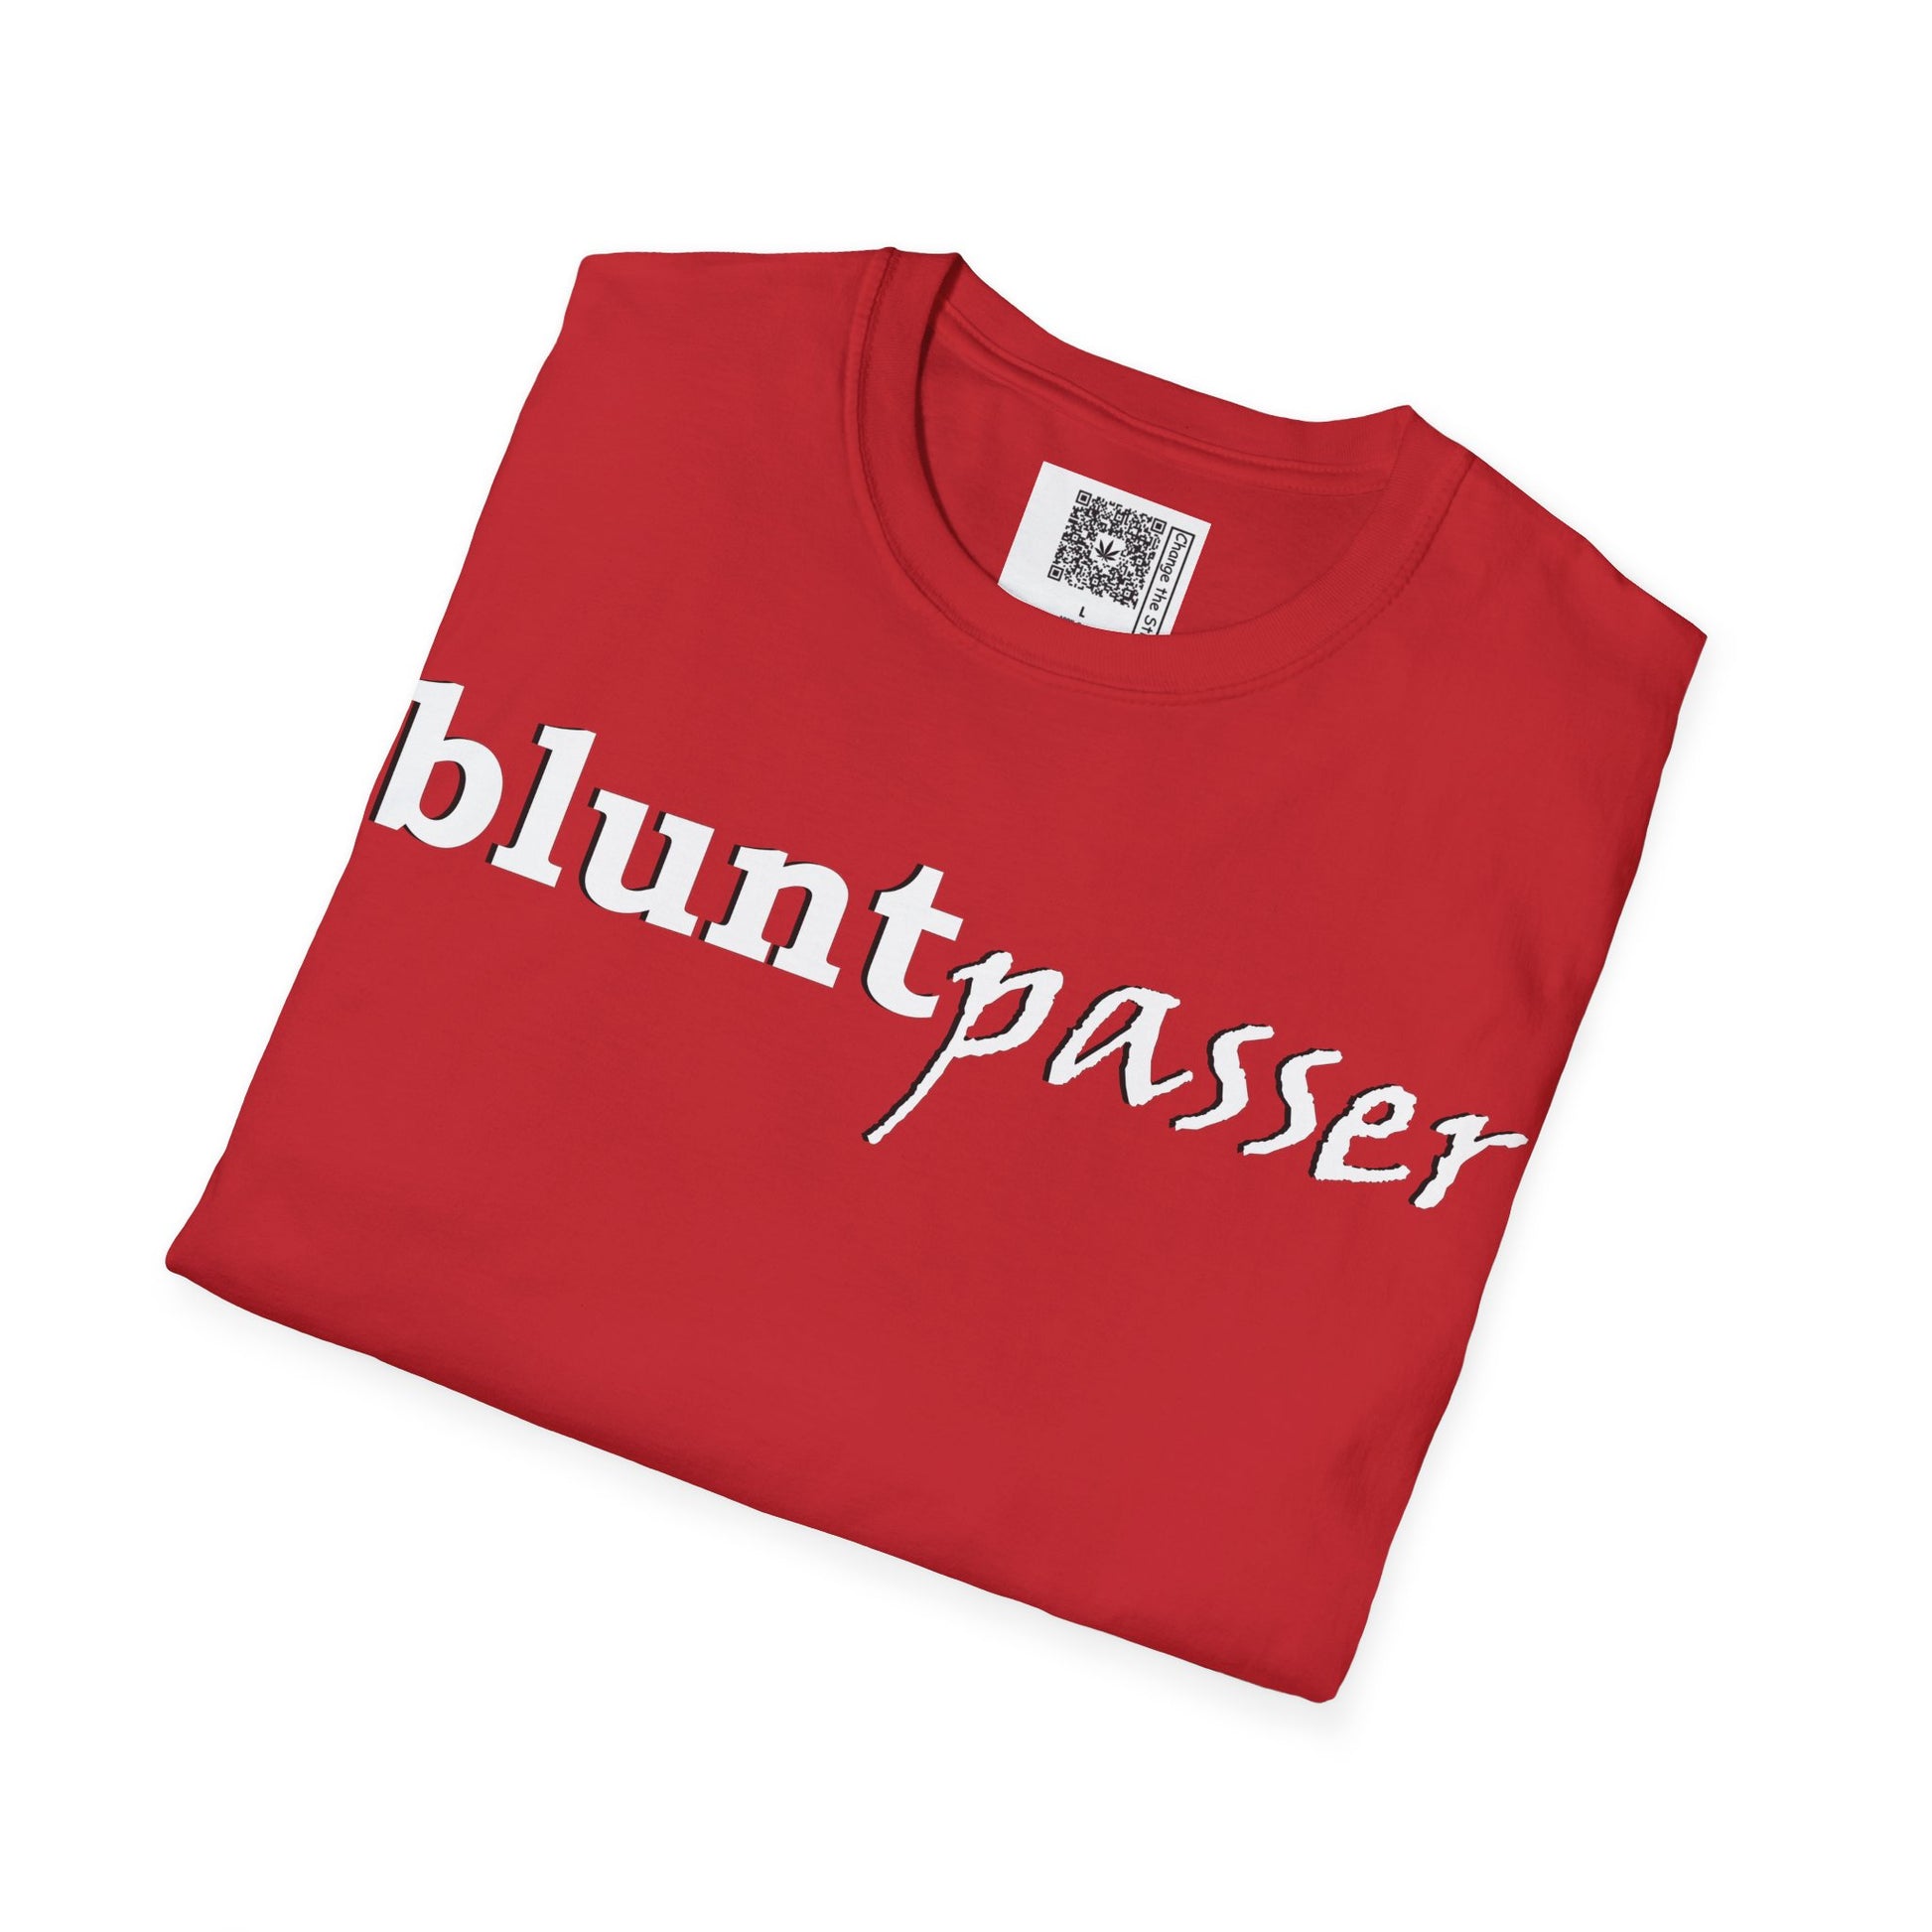 Change the Stigma, Red color, shirt saying "blunt passer", Folded, Qr code is shown